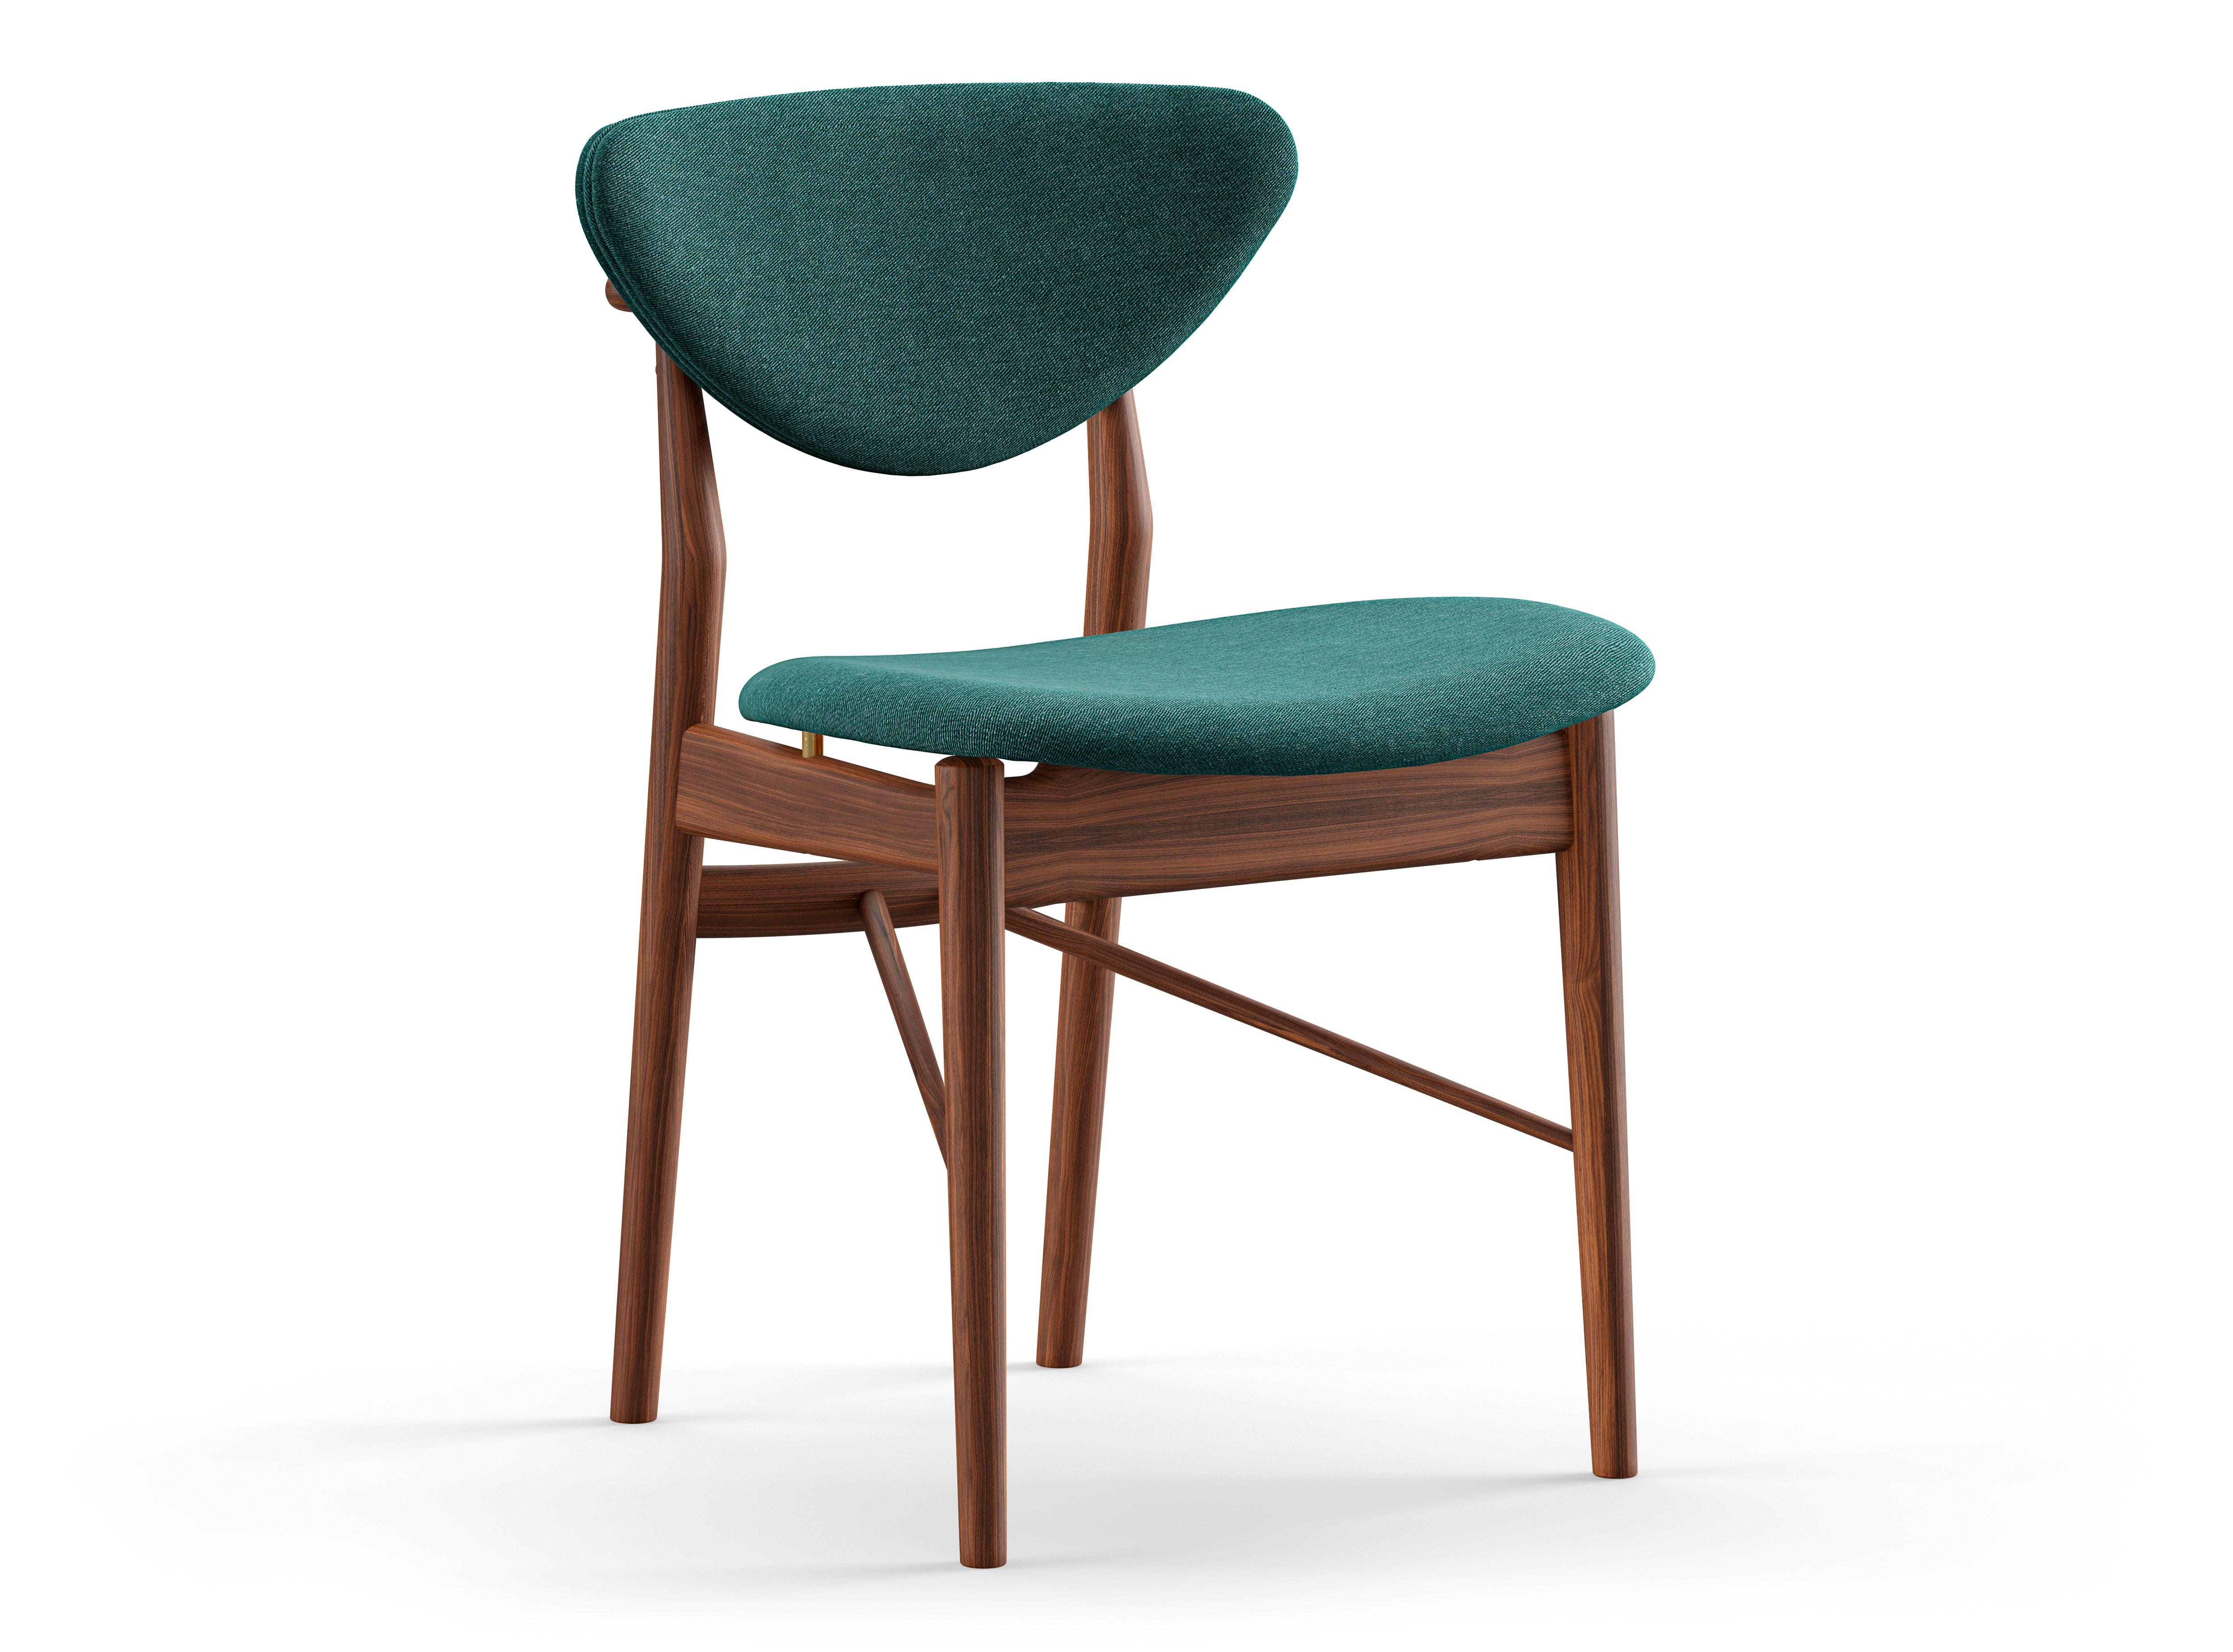 108 Chairs designed by Finn Juhl in 1946, relaunched in 208.
Manufactured by House of Finn Juhl in Denmark.

To this day, Finn Juhl's designs are unconventional and defy expectations with subtle details. Finn Juhl himself once said that the